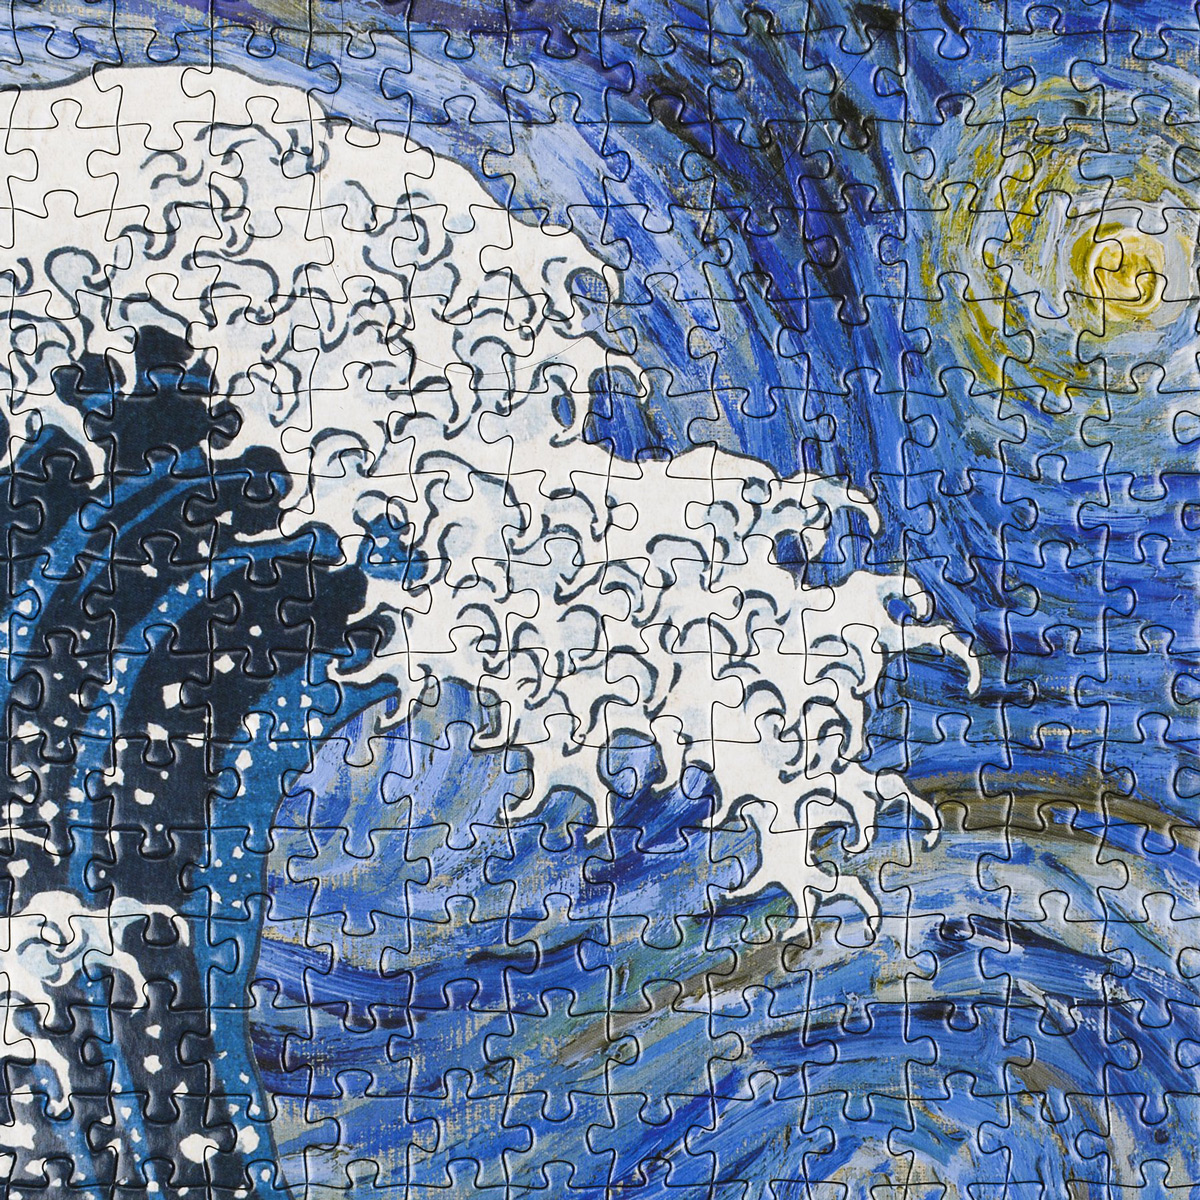 Starry Wave - A 1,000-piece Jigsaw Puzzle Featuring 'Starry Night' and 'The Wave'